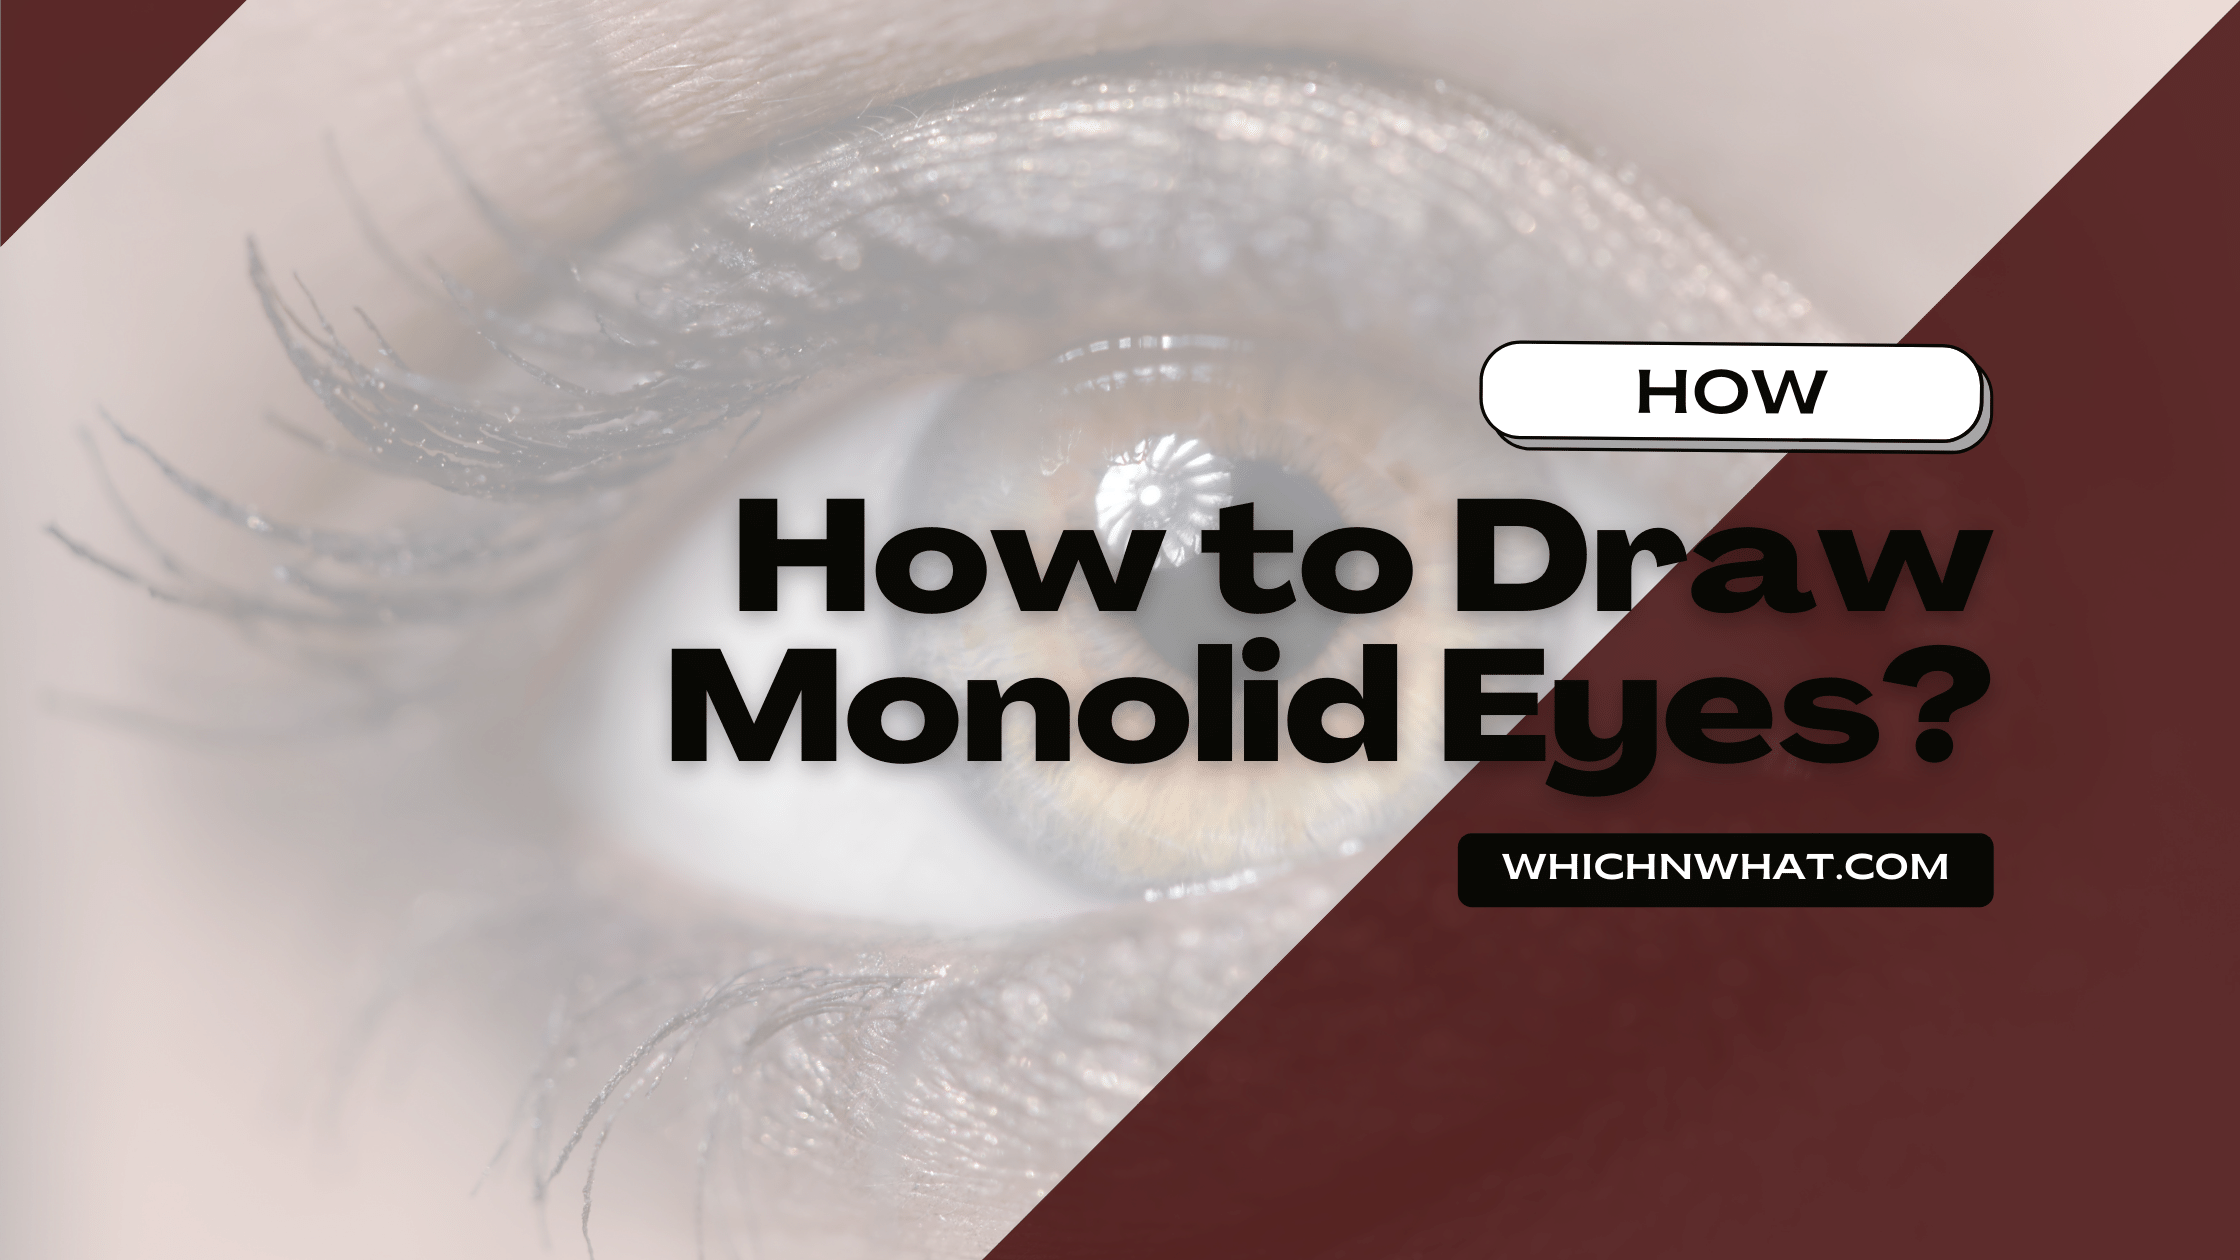 How to Draw Monolid Eyes? Best Answer Which & What